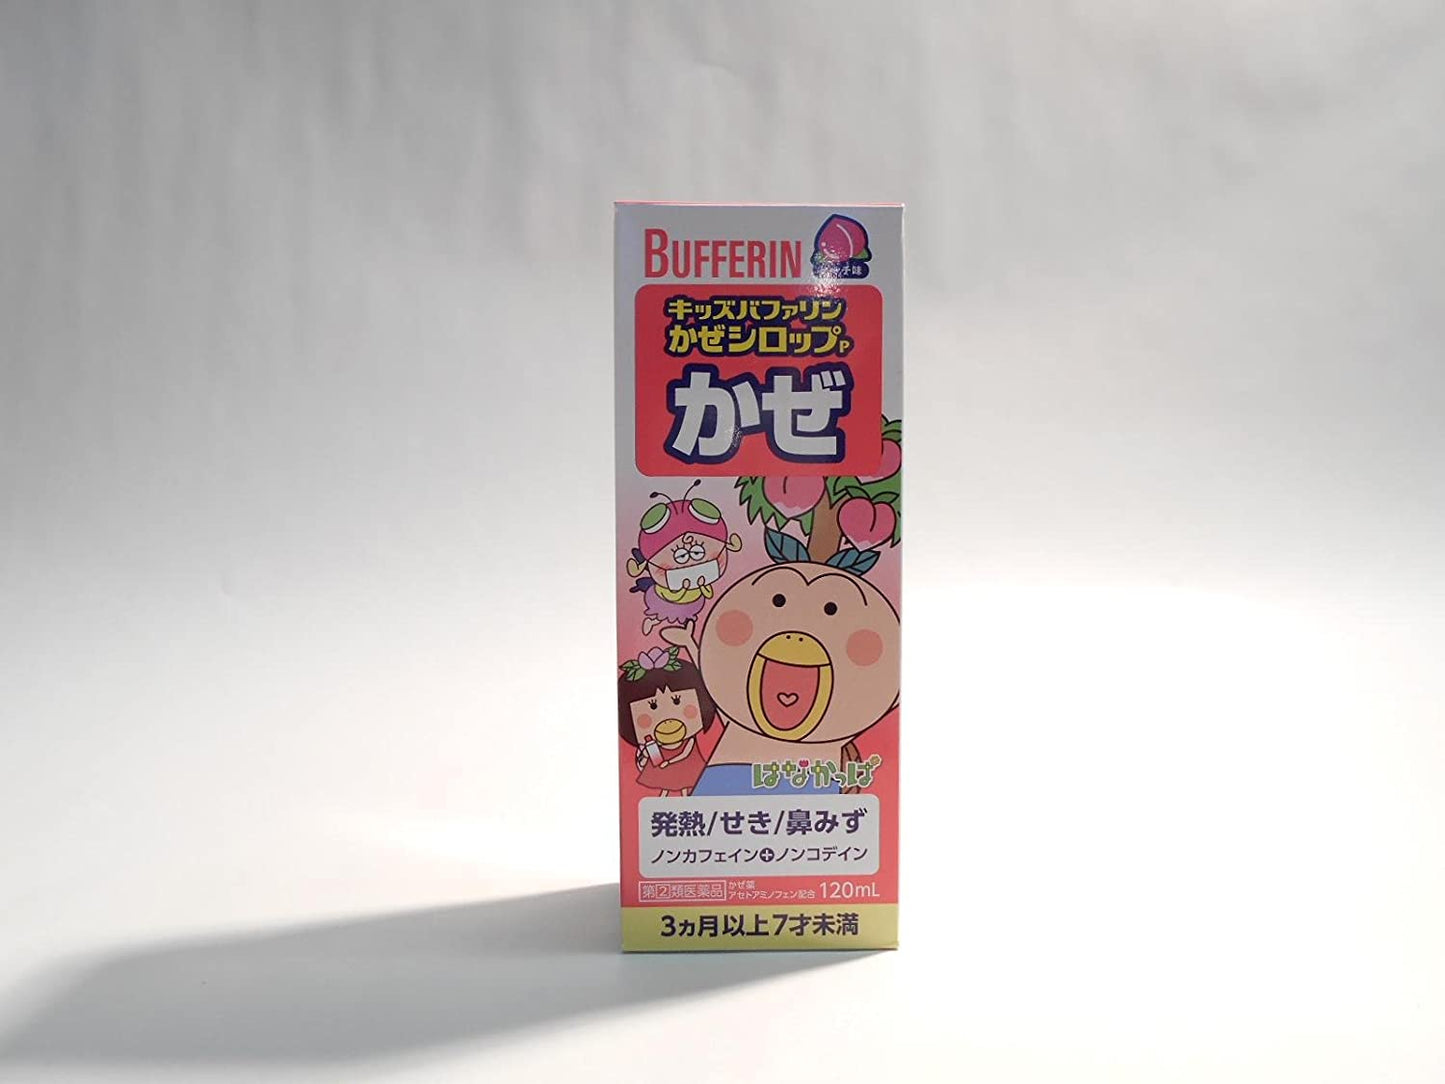 [LION] KIDS BUFFERIN COLD SYRUP P 120ML Pain reliever/ Fever reducer